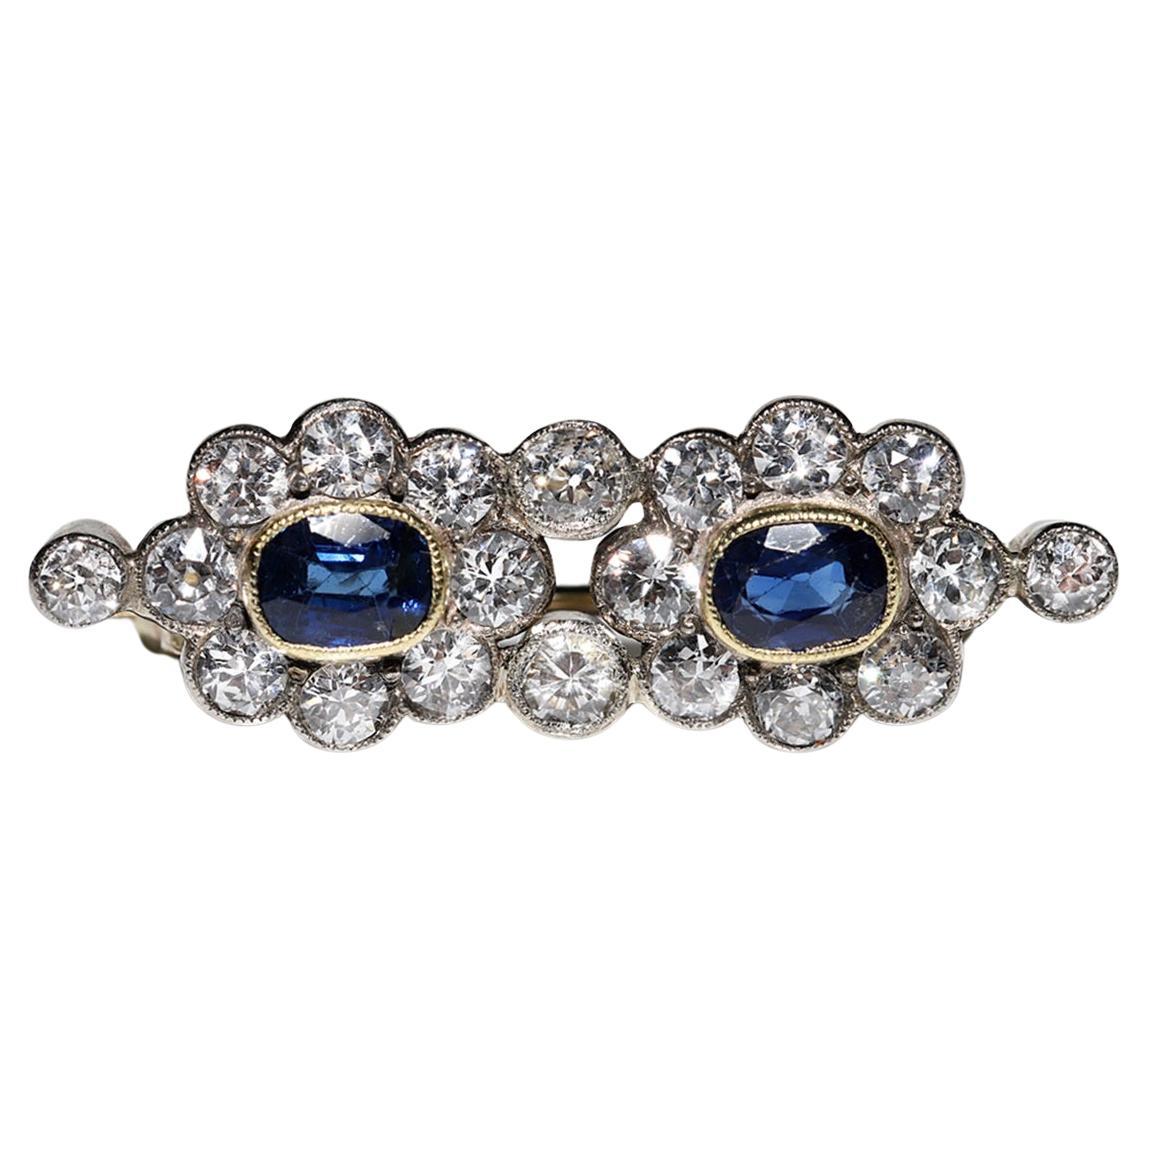 Antique Circa 1900s 14k Gold Natural Diamond And Sapphire Decorated Brooch For Sale